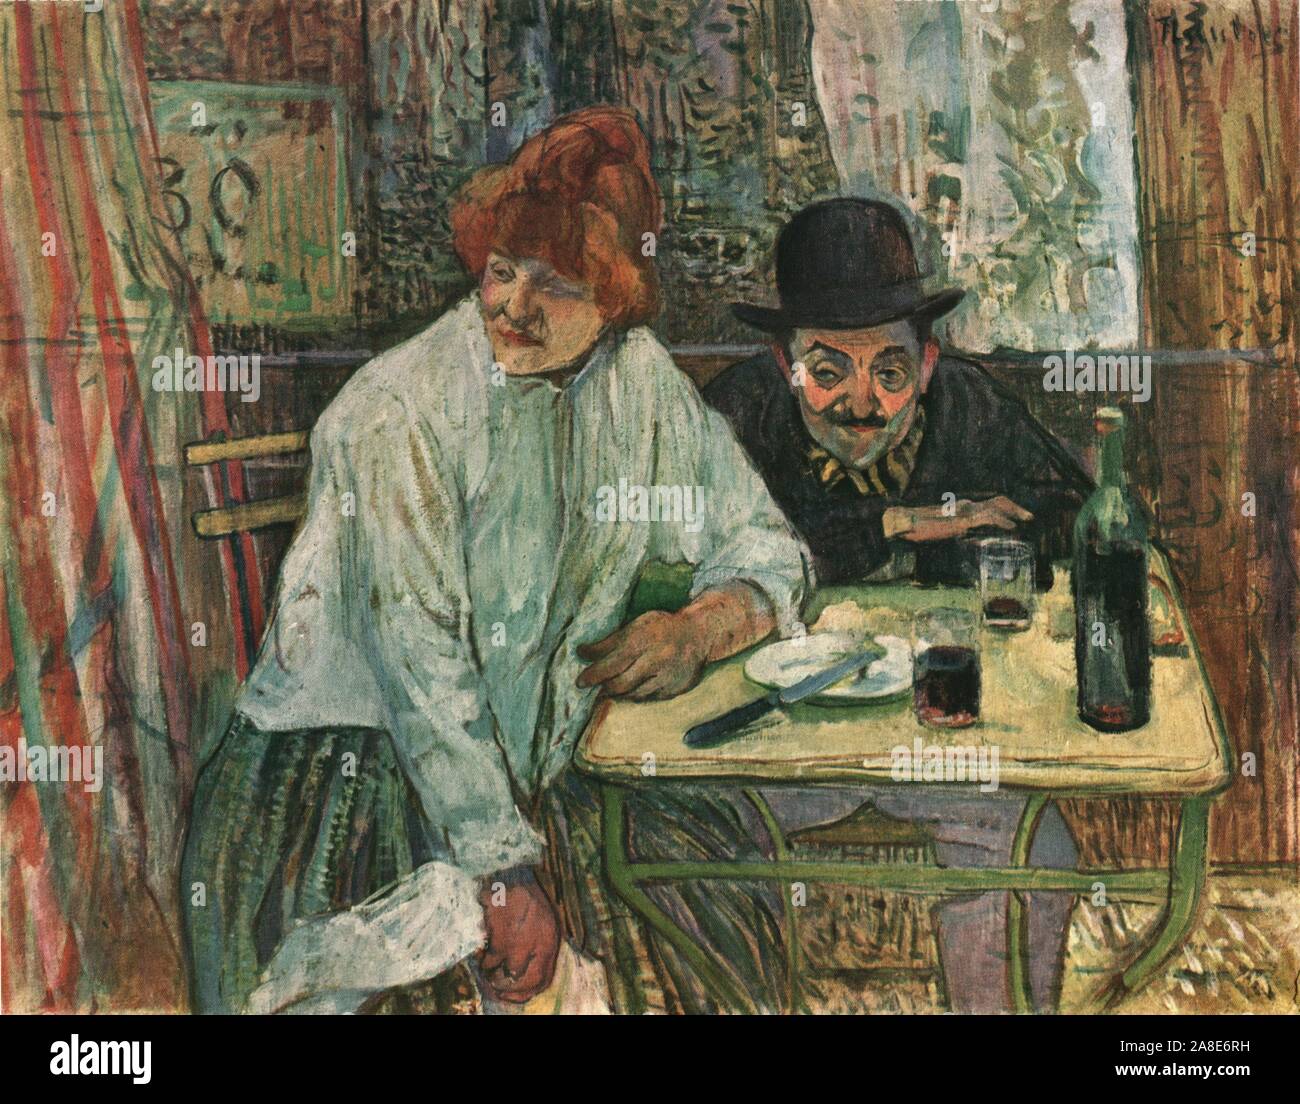 'At the Caf&#xe9; La Mie', c1891, (1952). Man and woman drinking at a table, based on a staged photograph of Lautrec's friend Maurice Guibert. Painting in the Museum of Fine Arts, Boston, USA. From &quot;Henri De Toulouse-Lautrec&quot; by Douglas Cooper. [Thames and Hudson, London, 1952] Stock Photo